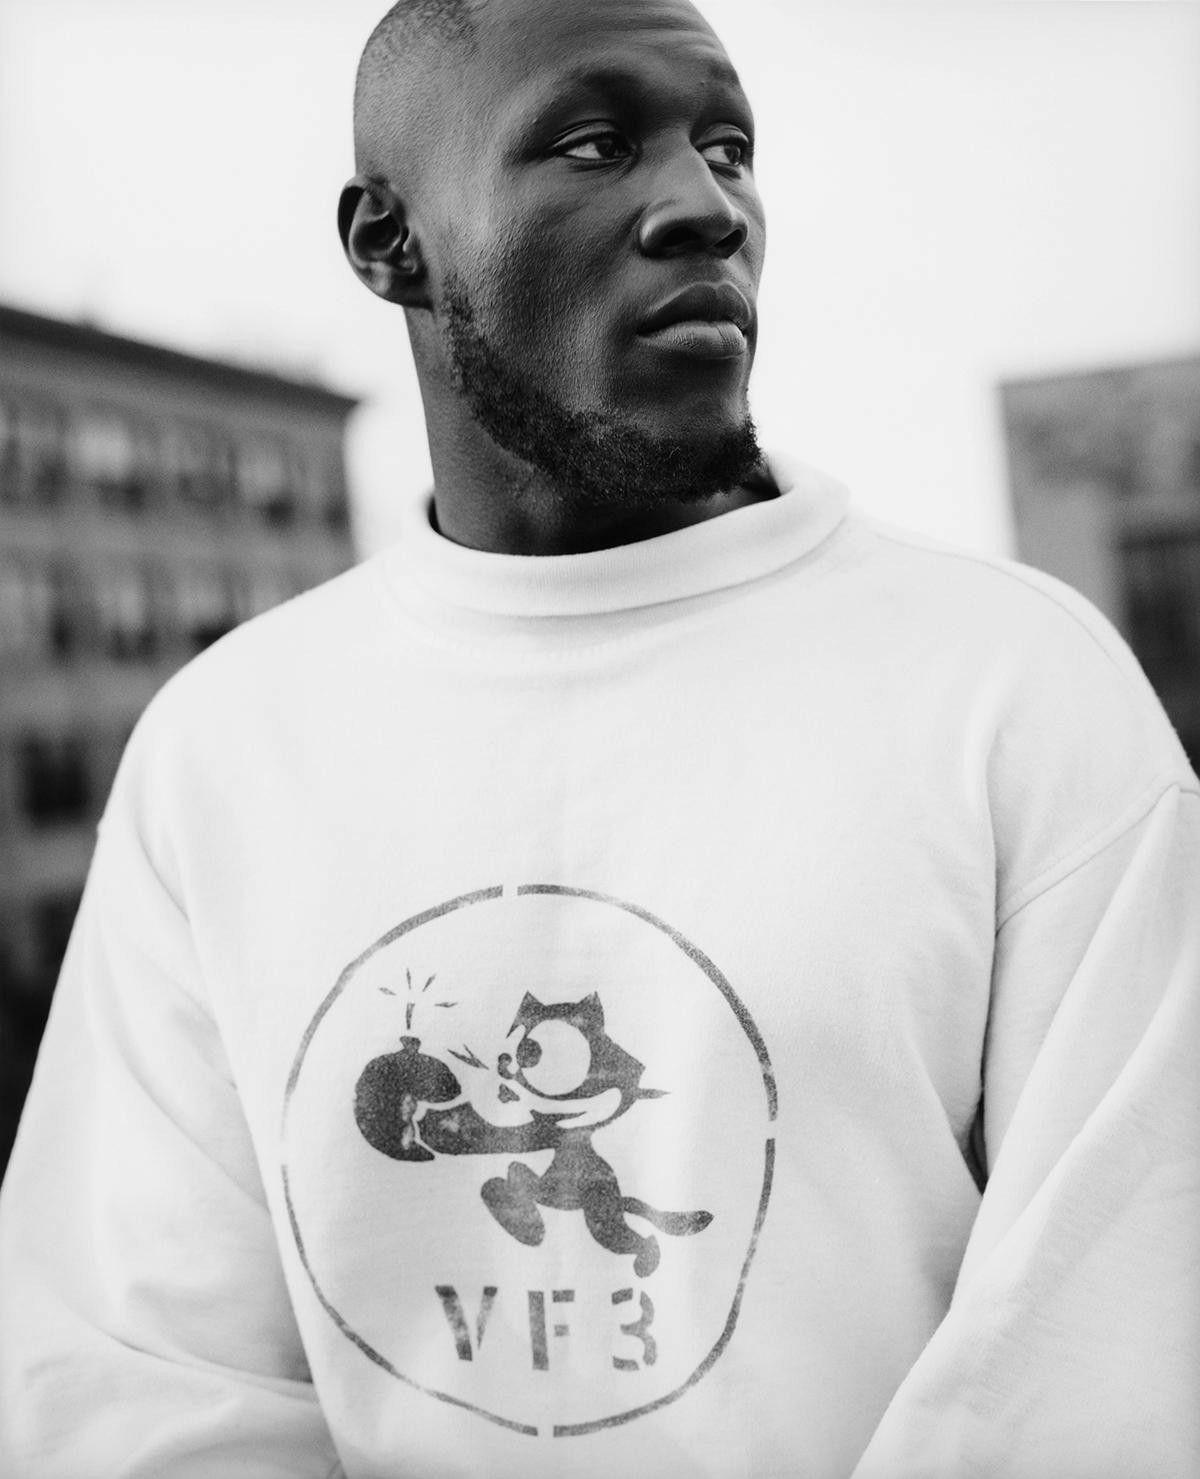 Stormzy. LC. Uk music, Youth culture, People